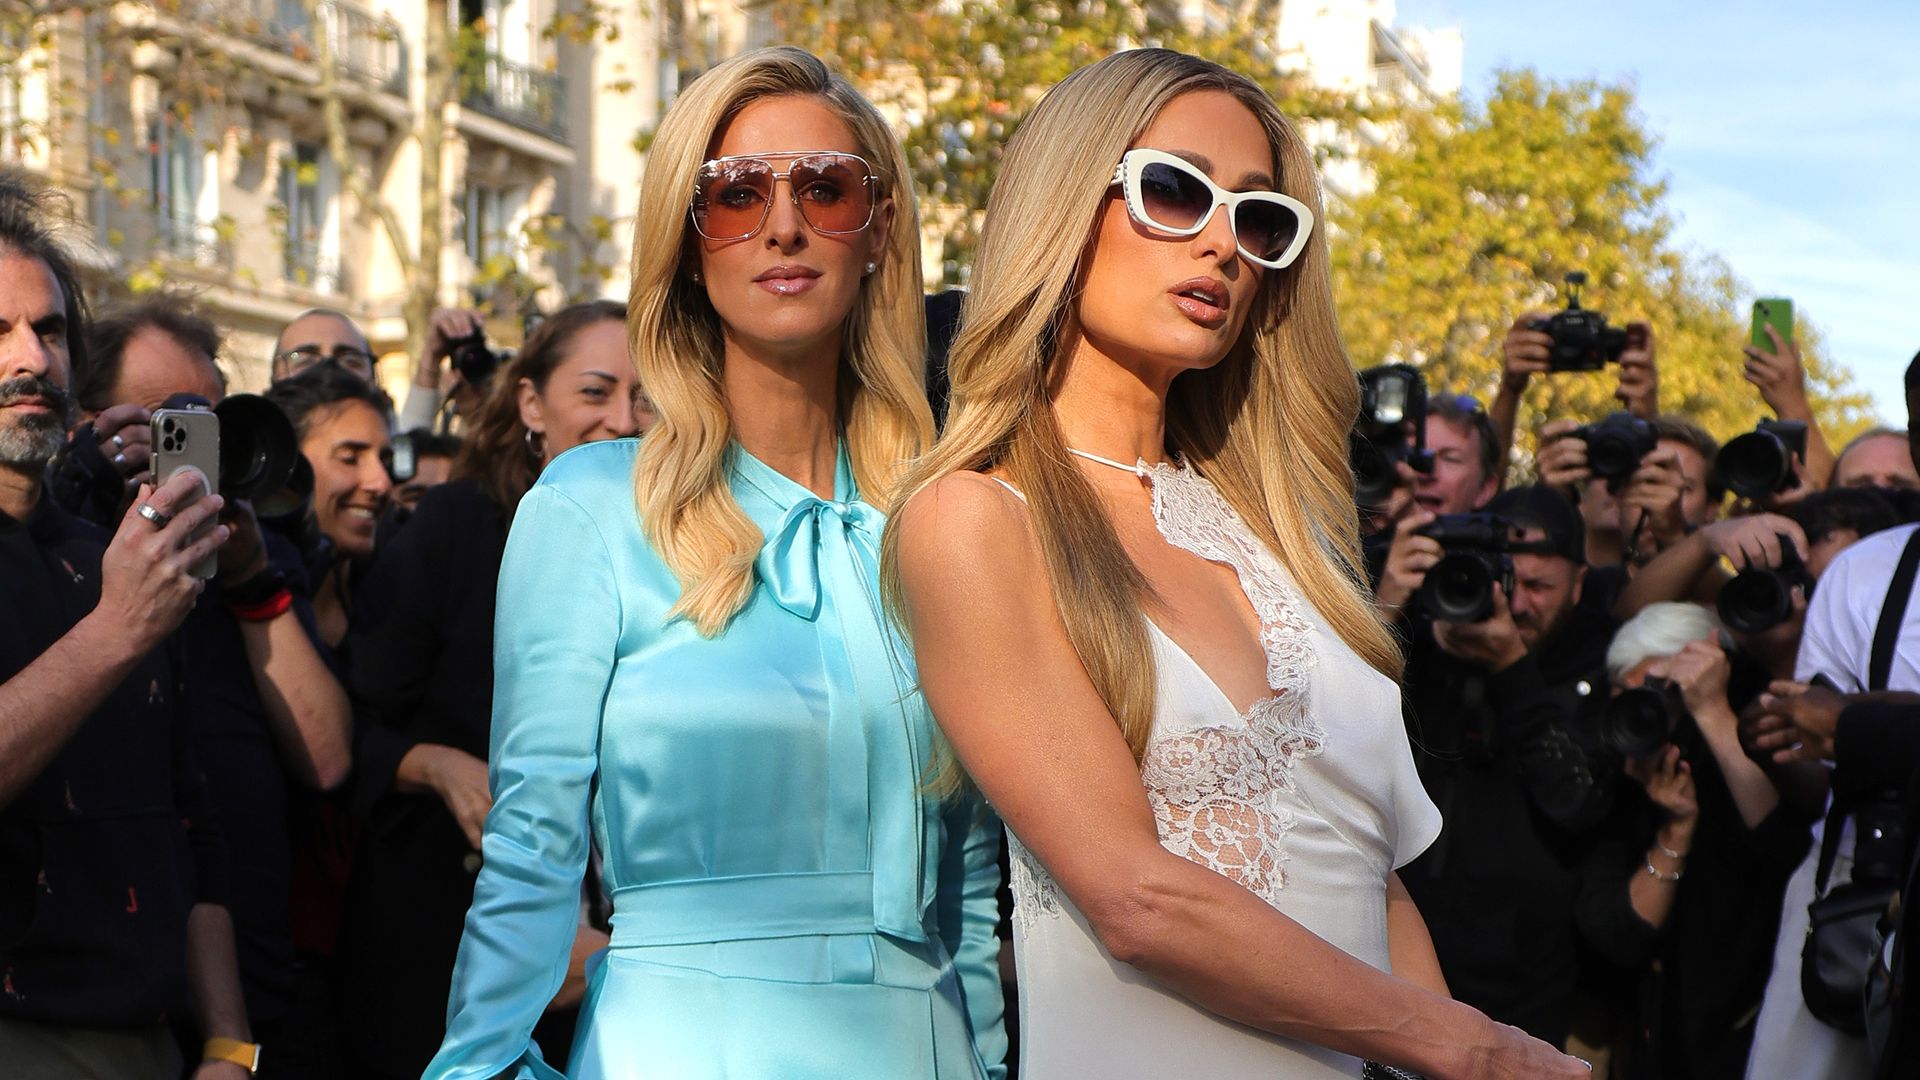 Paris and Nicky Hilton prove they are style opposites at Paris Fashion Week